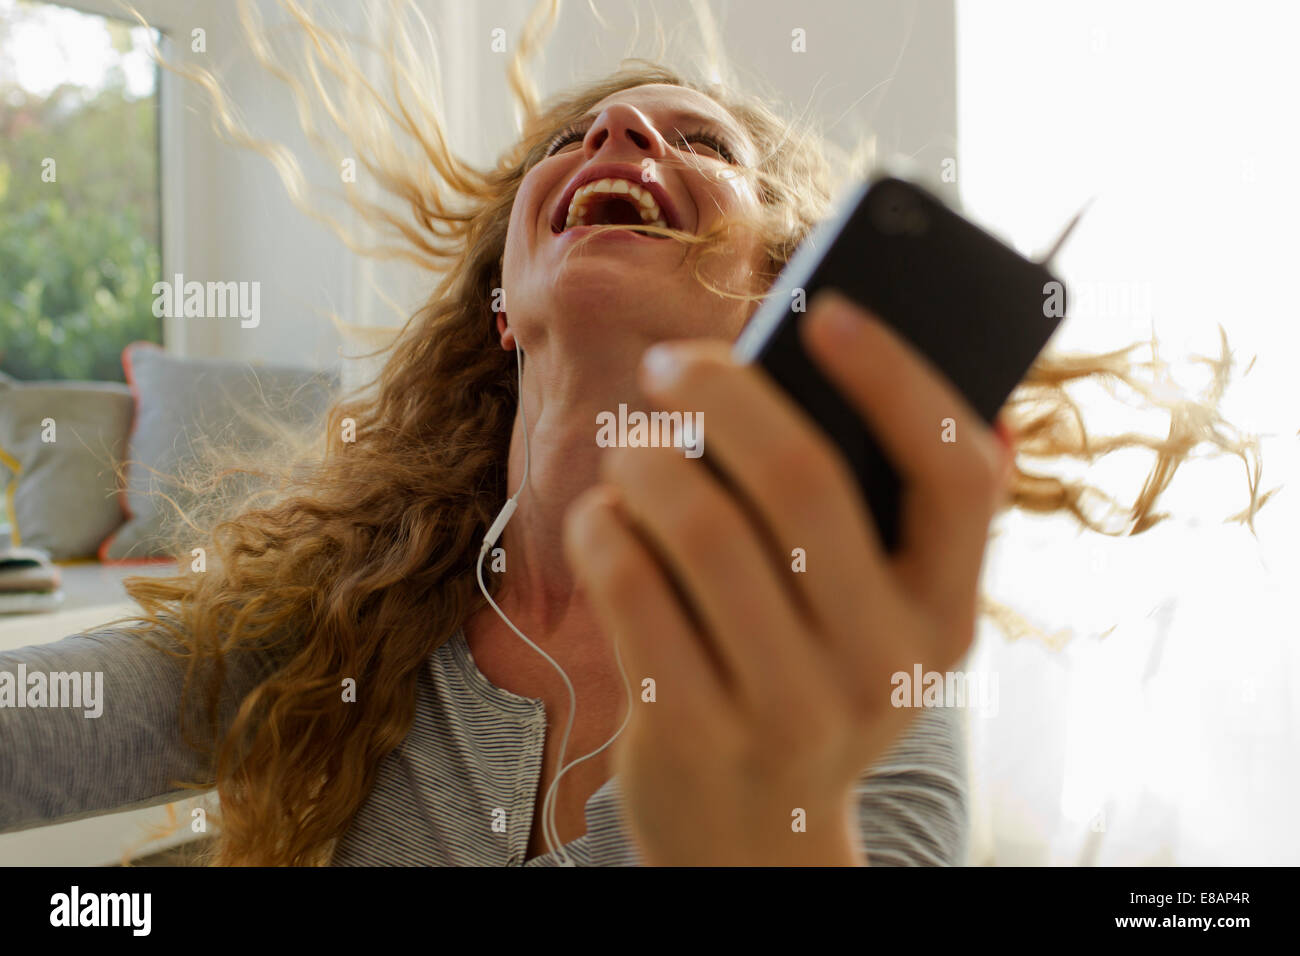 Woman dancing to music on smartphone Stock Photo